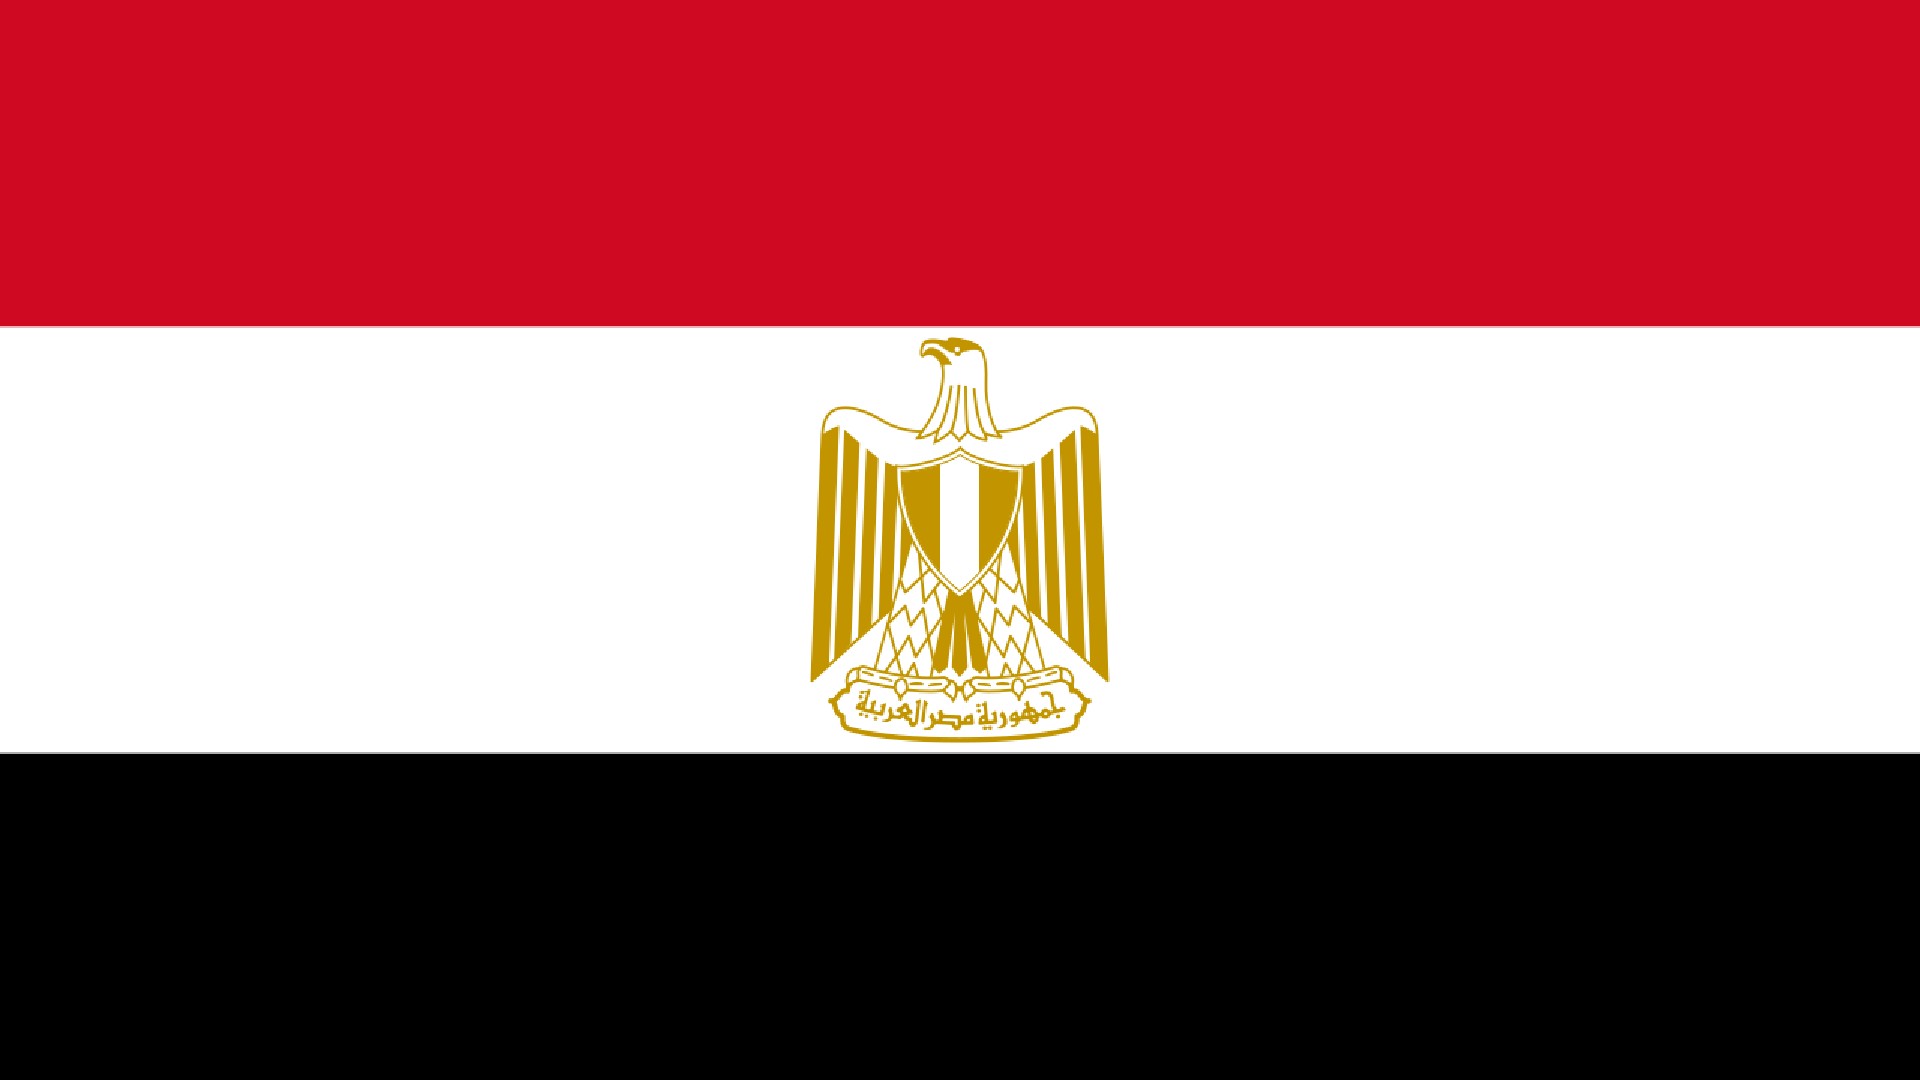 An image of the flag of Egypt